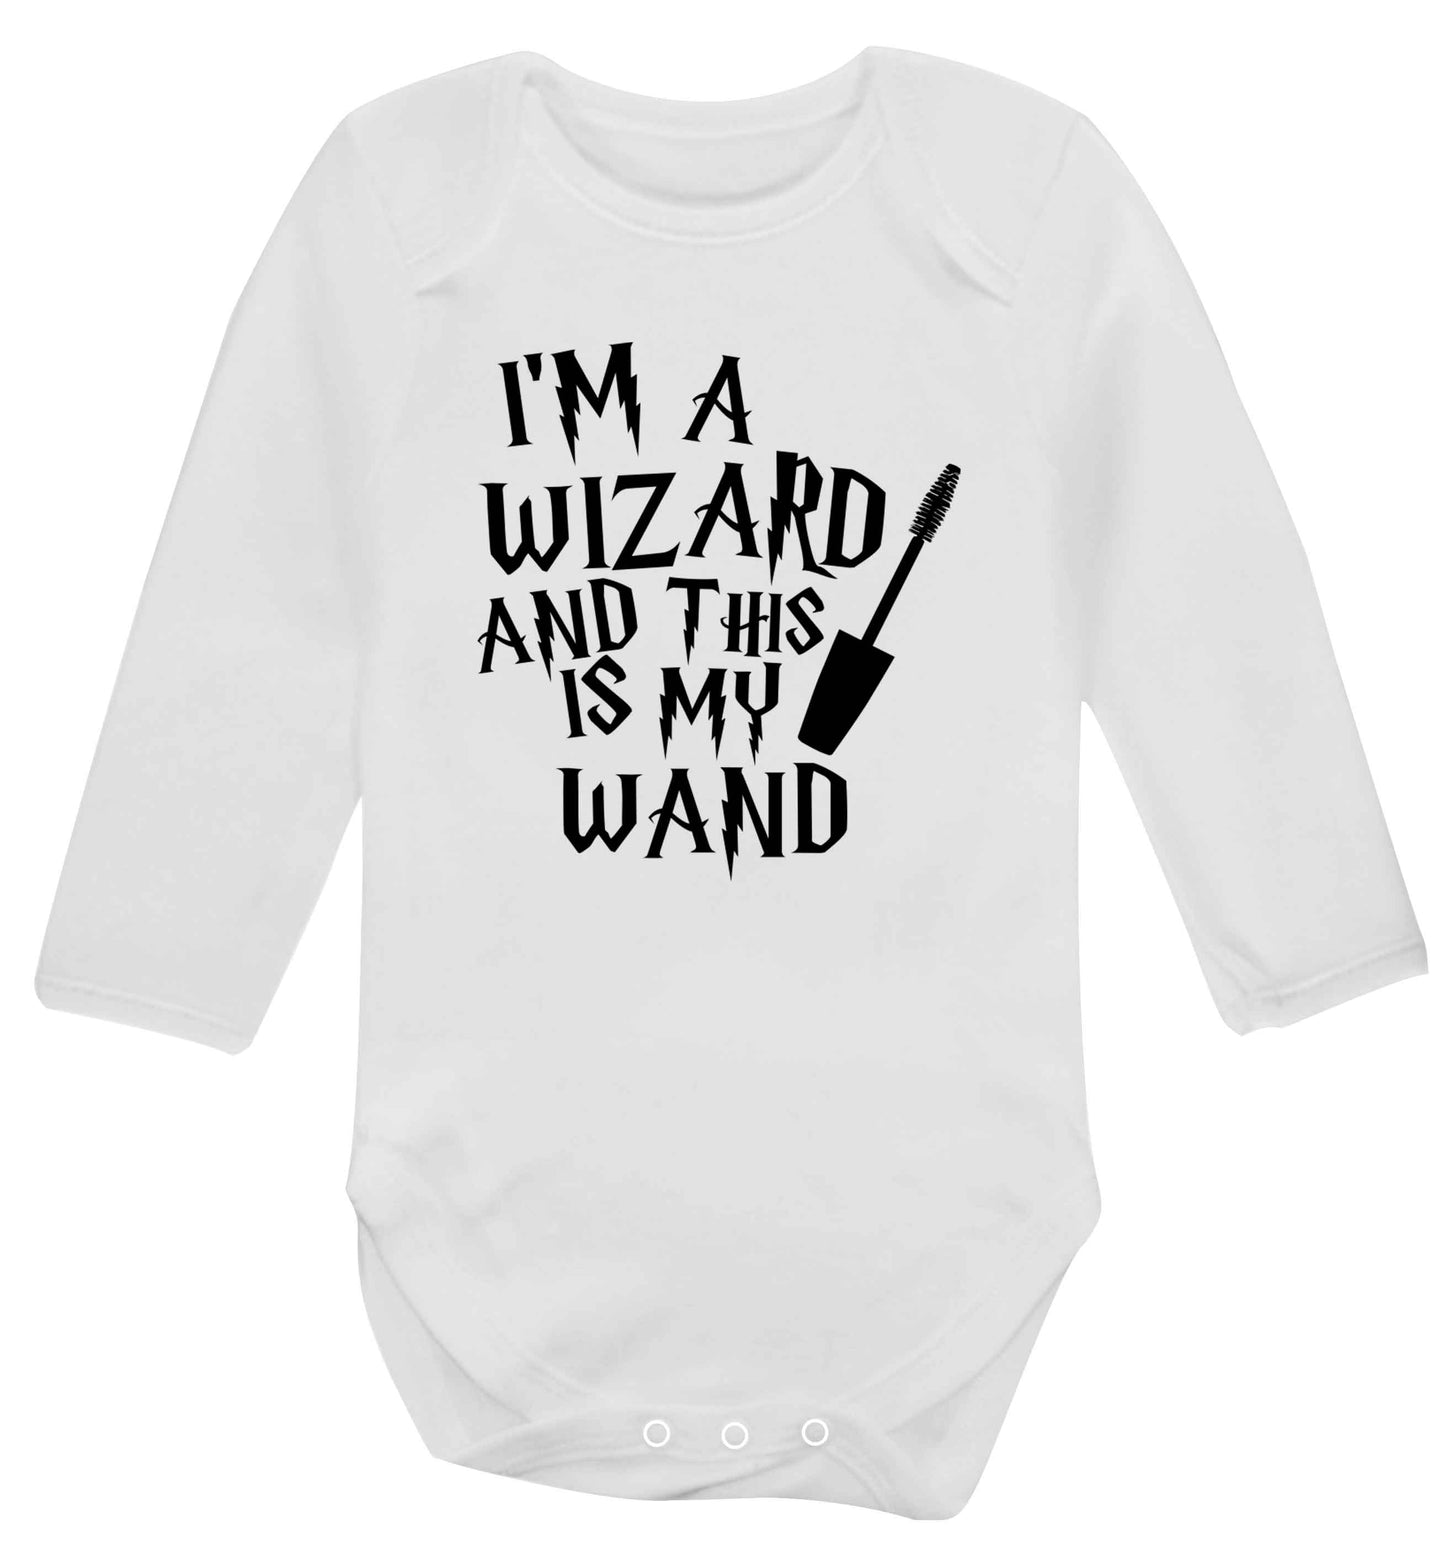 I'm a wizard and this is my wand Baby Vest long sleeved white 6-12 months